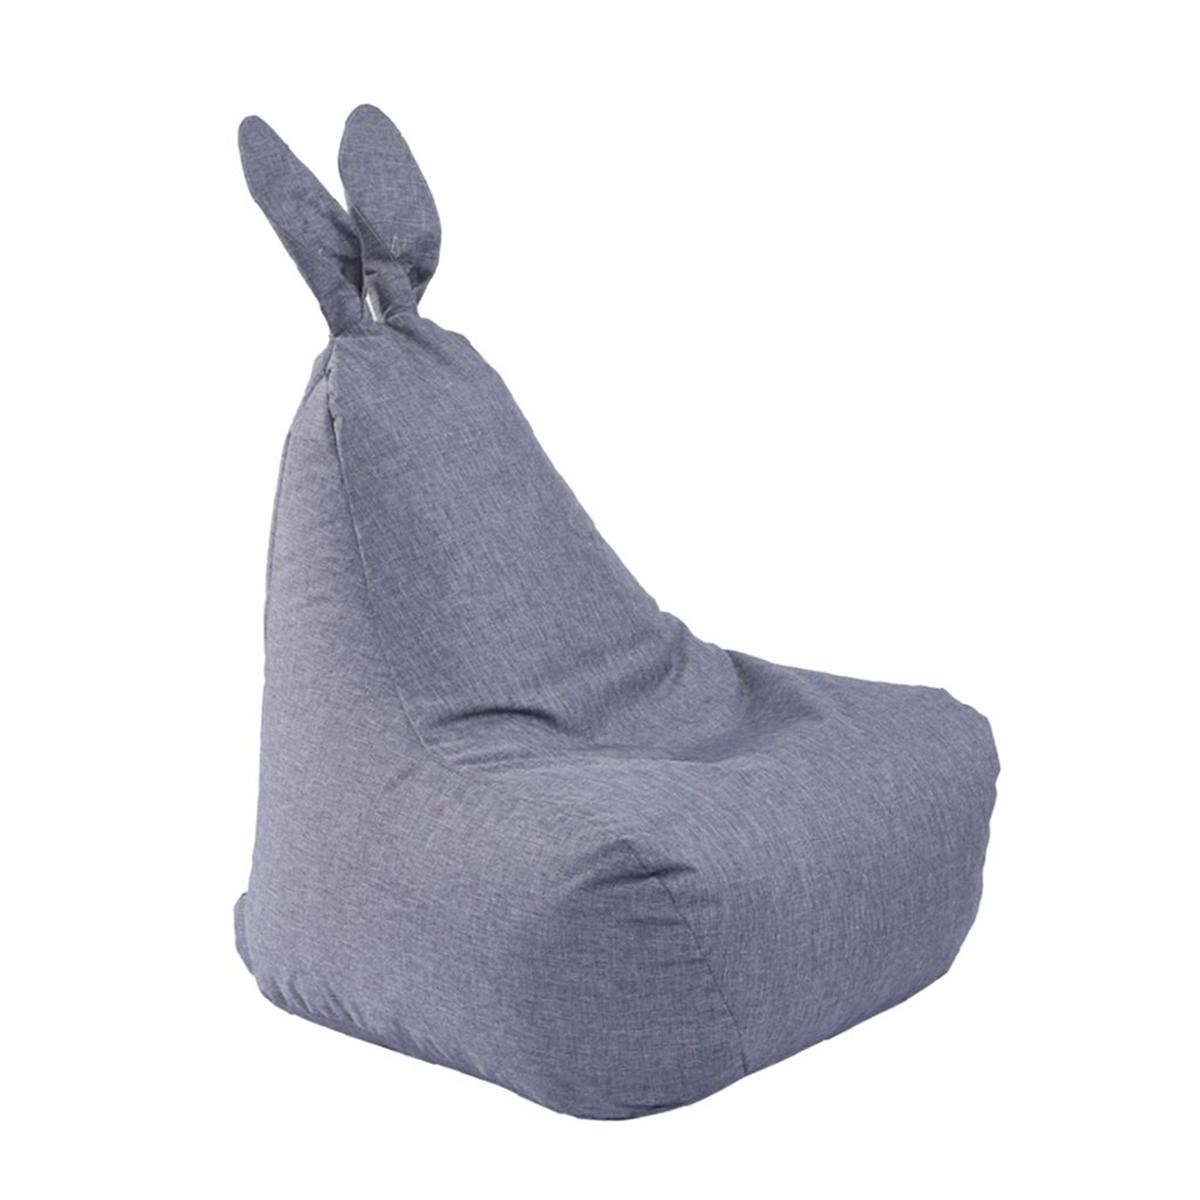 

Rabbit Shape Bean Bag Chair Seat Sofa Cover For Adults Kids Without Filling Home Room